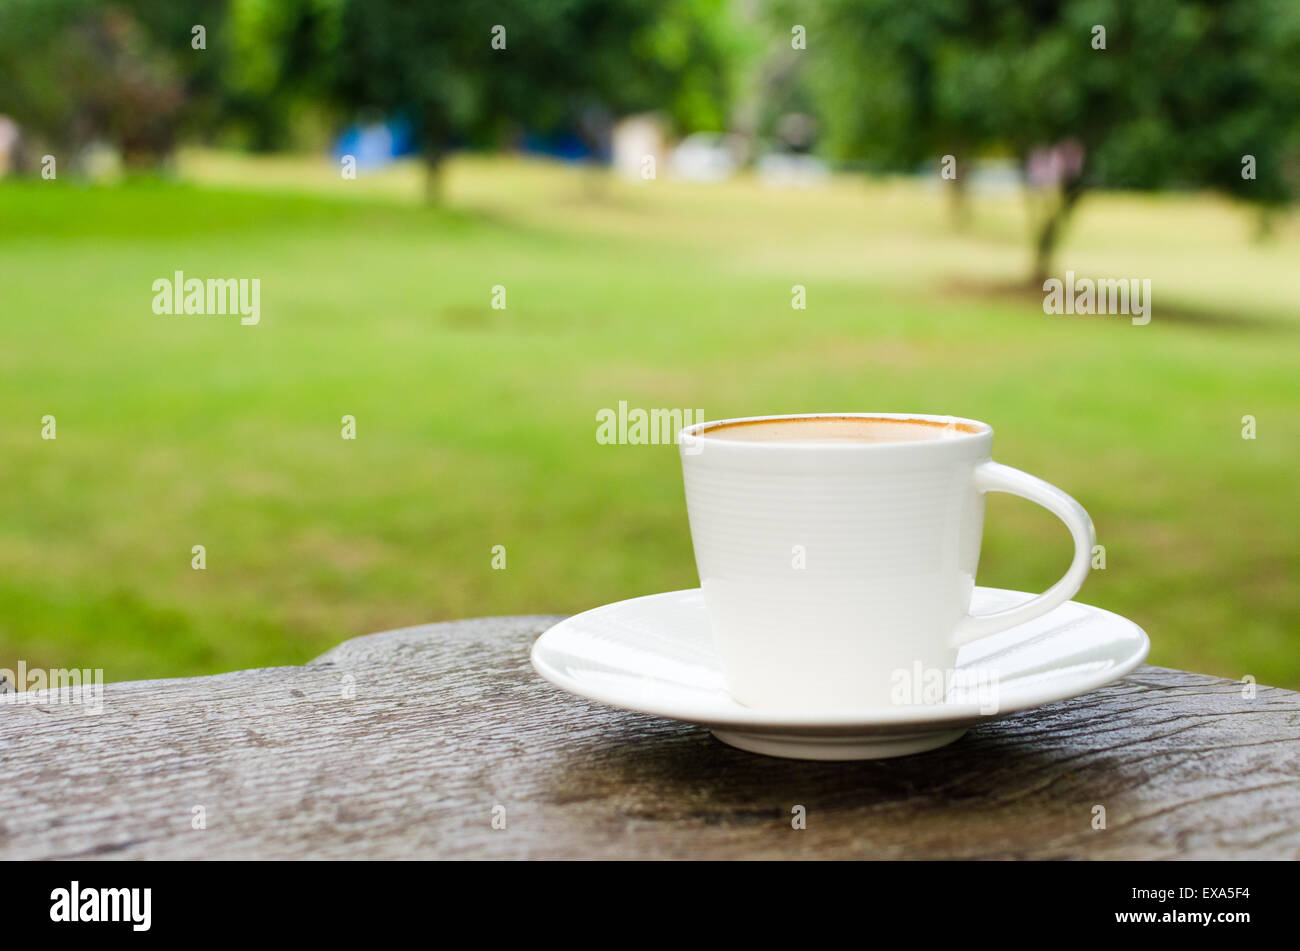 Cup of coffee on wooden table in garden Stock Photo